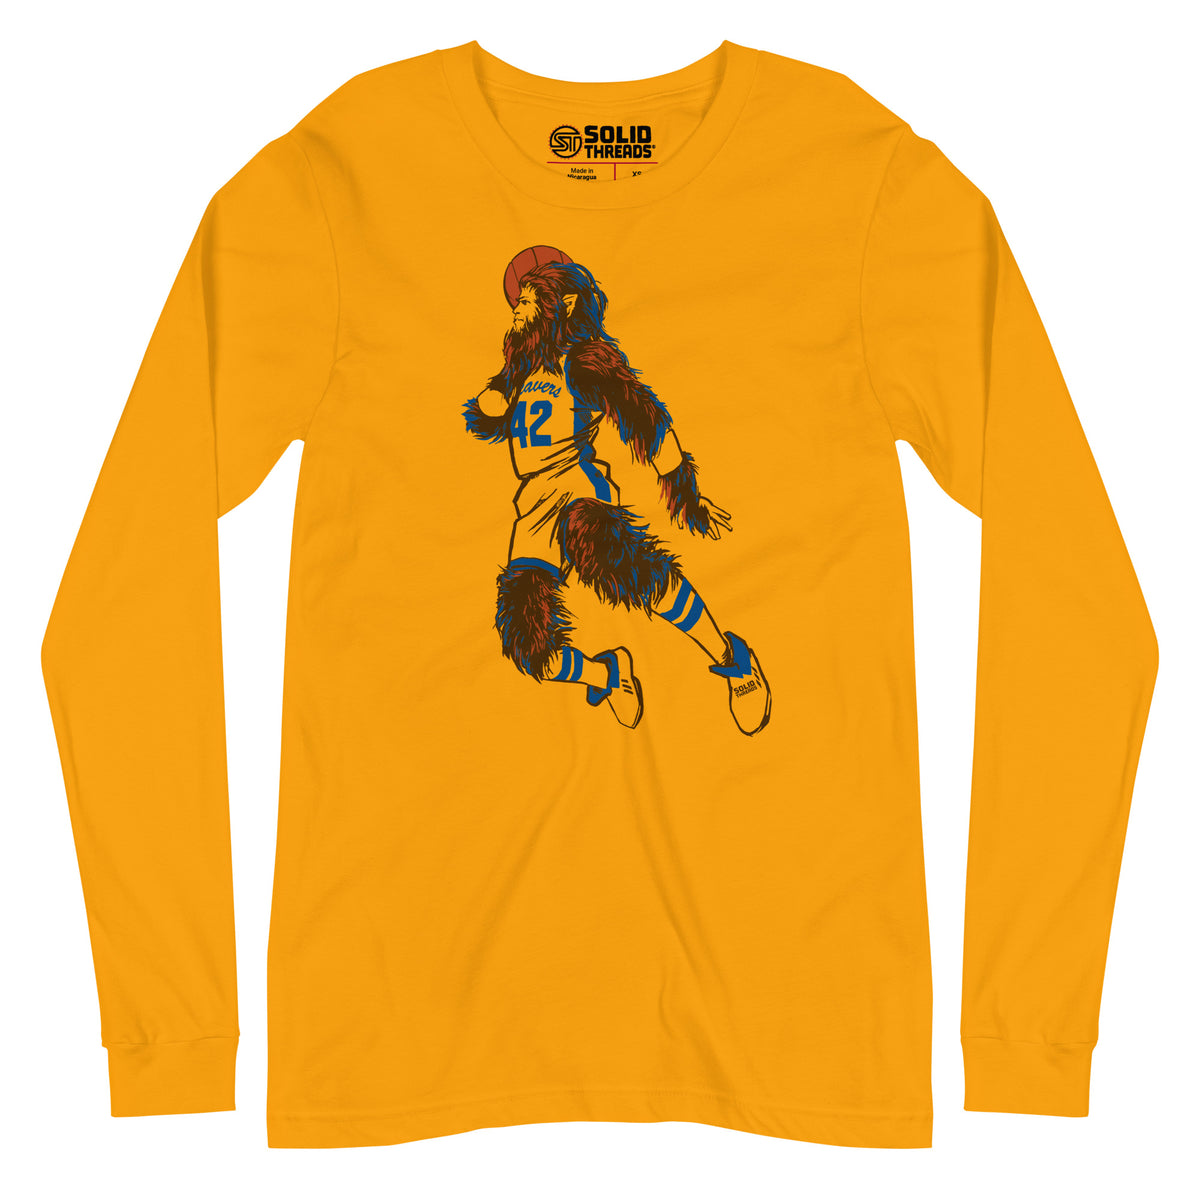 Teen Wolf Vintage Graphic Long Sleeve Tee | Funny Michael J. Fox T-Shirt Gold - Solid Threads